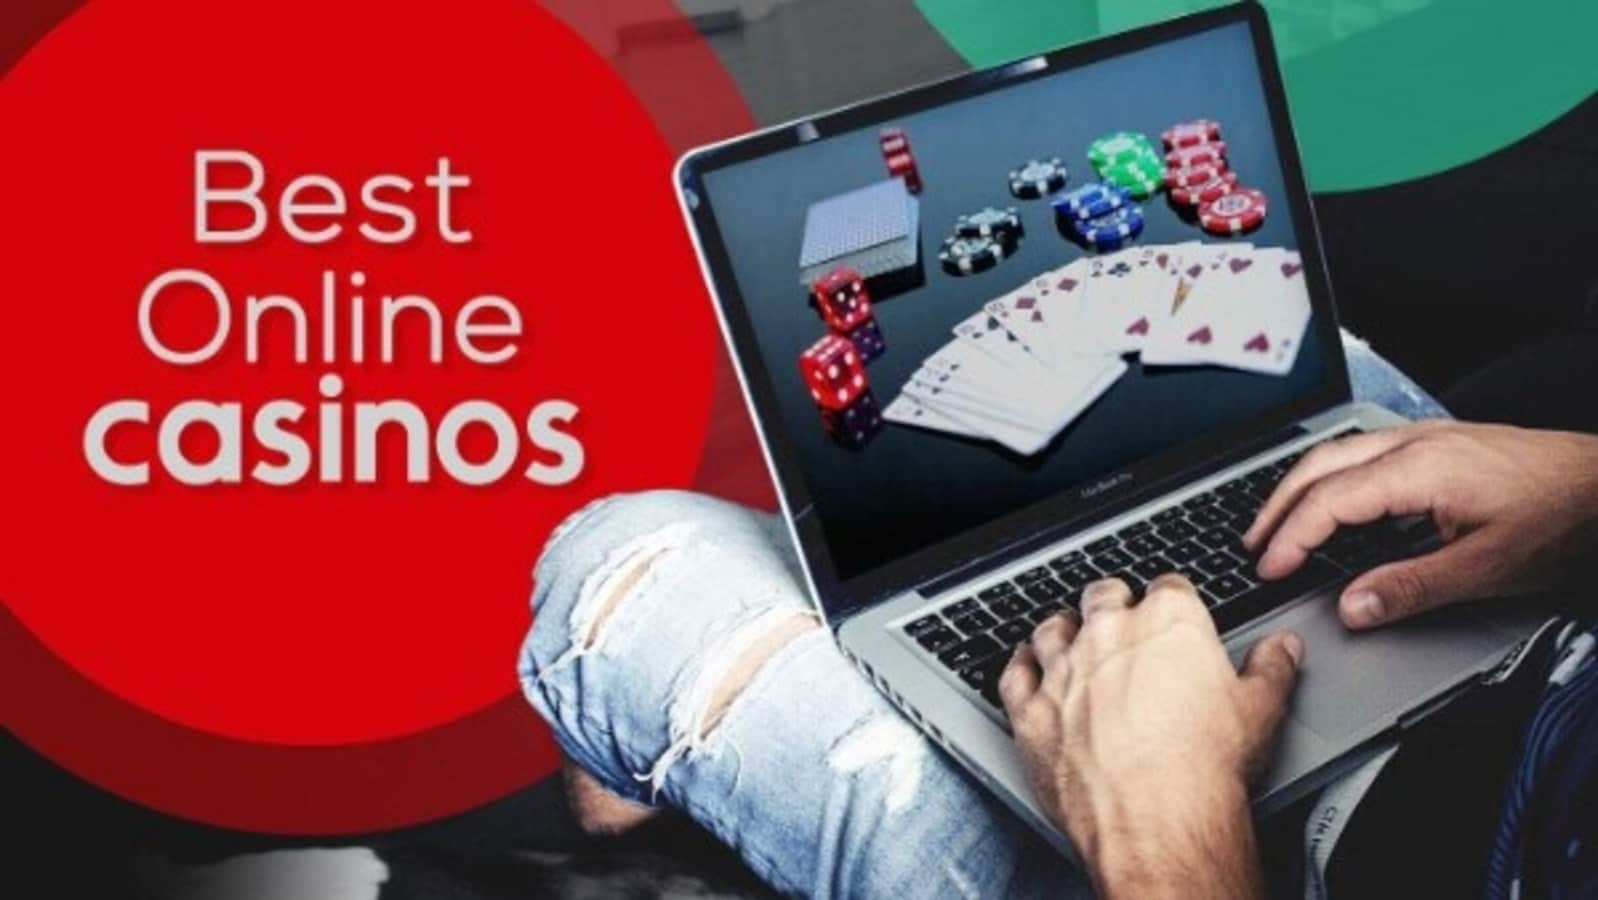 Best Gambling Sites Ranked by Real Money Casino Games, Bonuses & More  (2022) - Hindustan Times